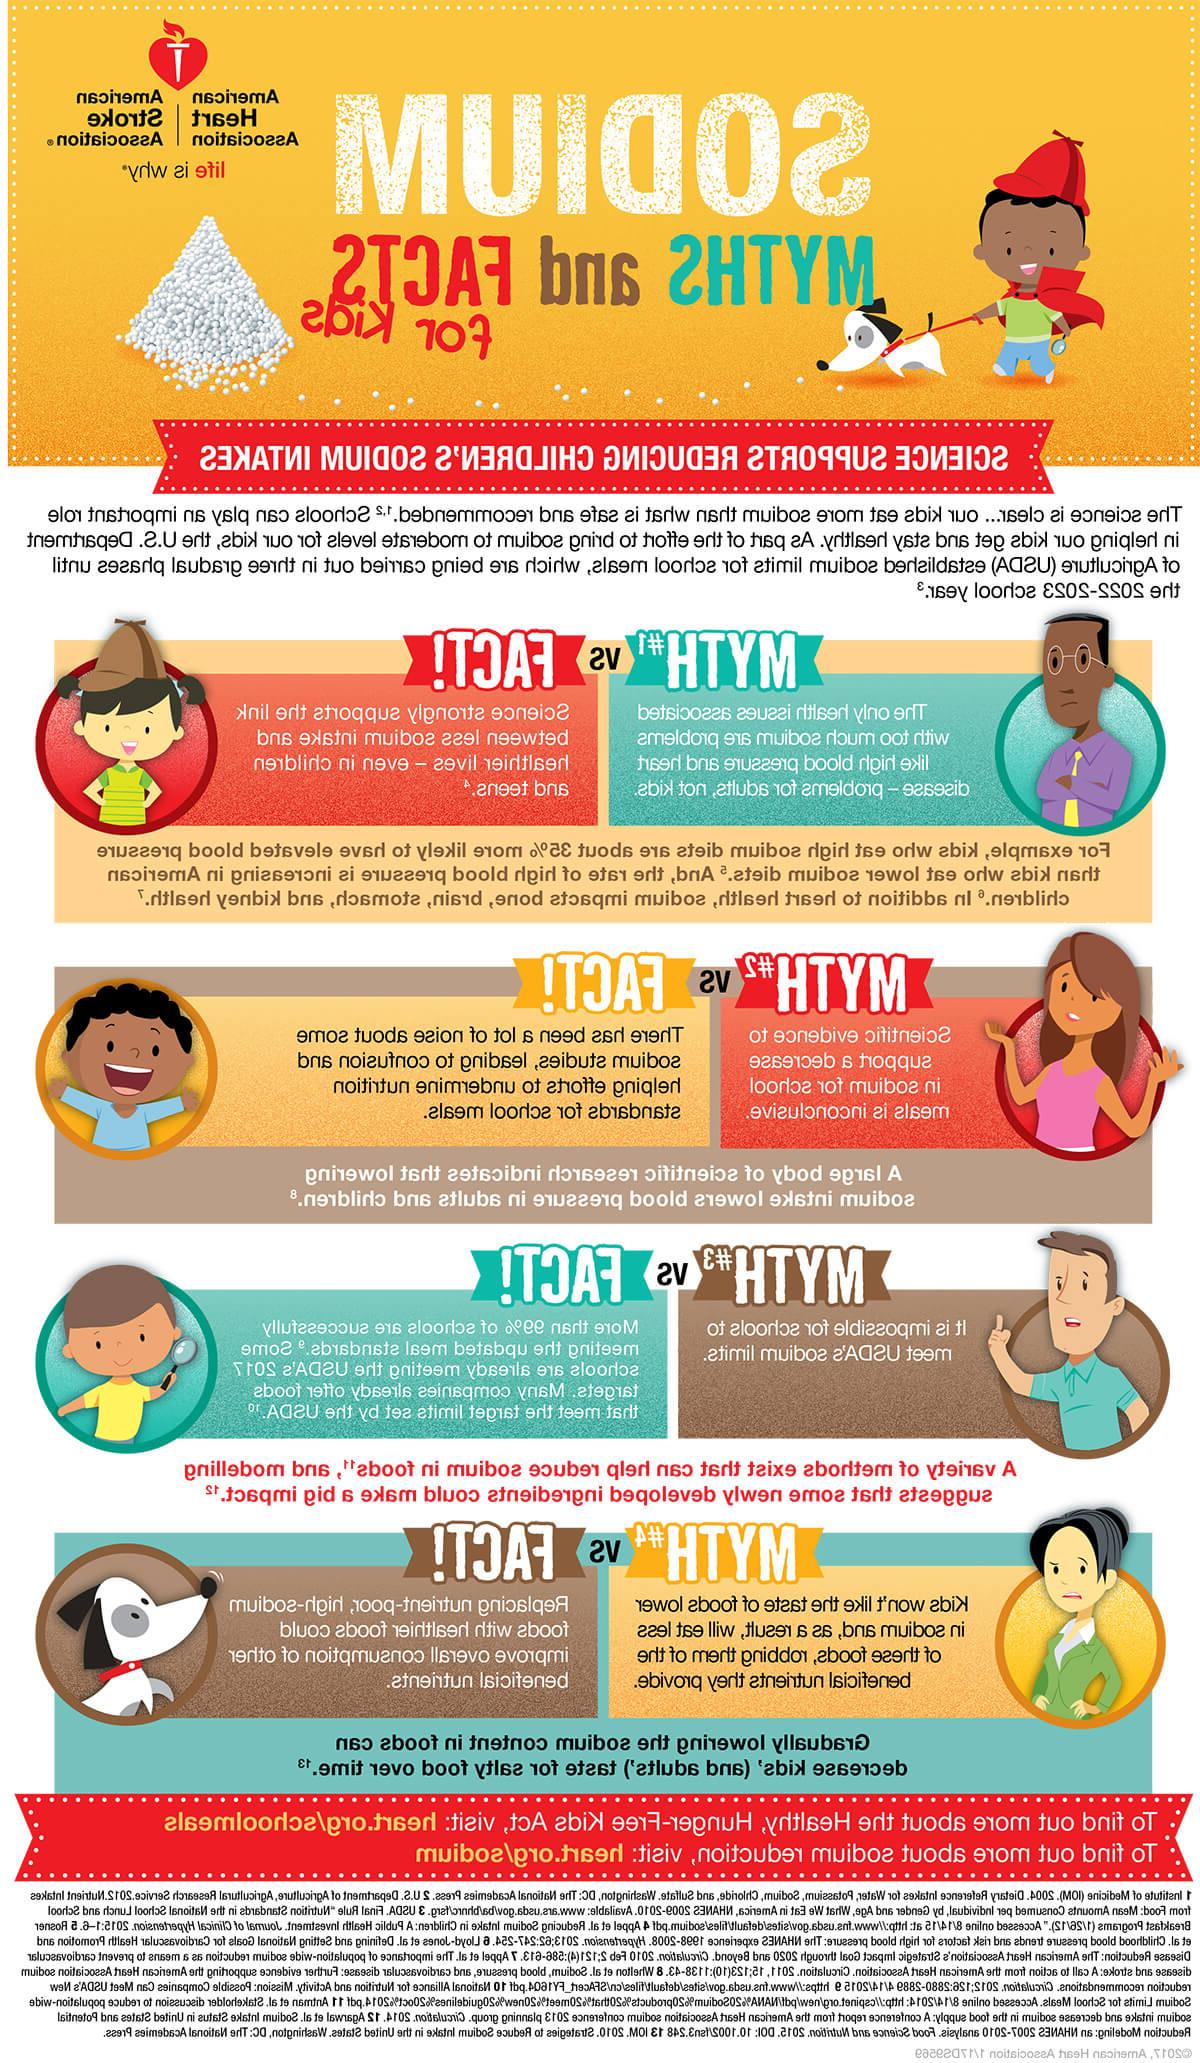 Sodium myths and facts for kids infographic